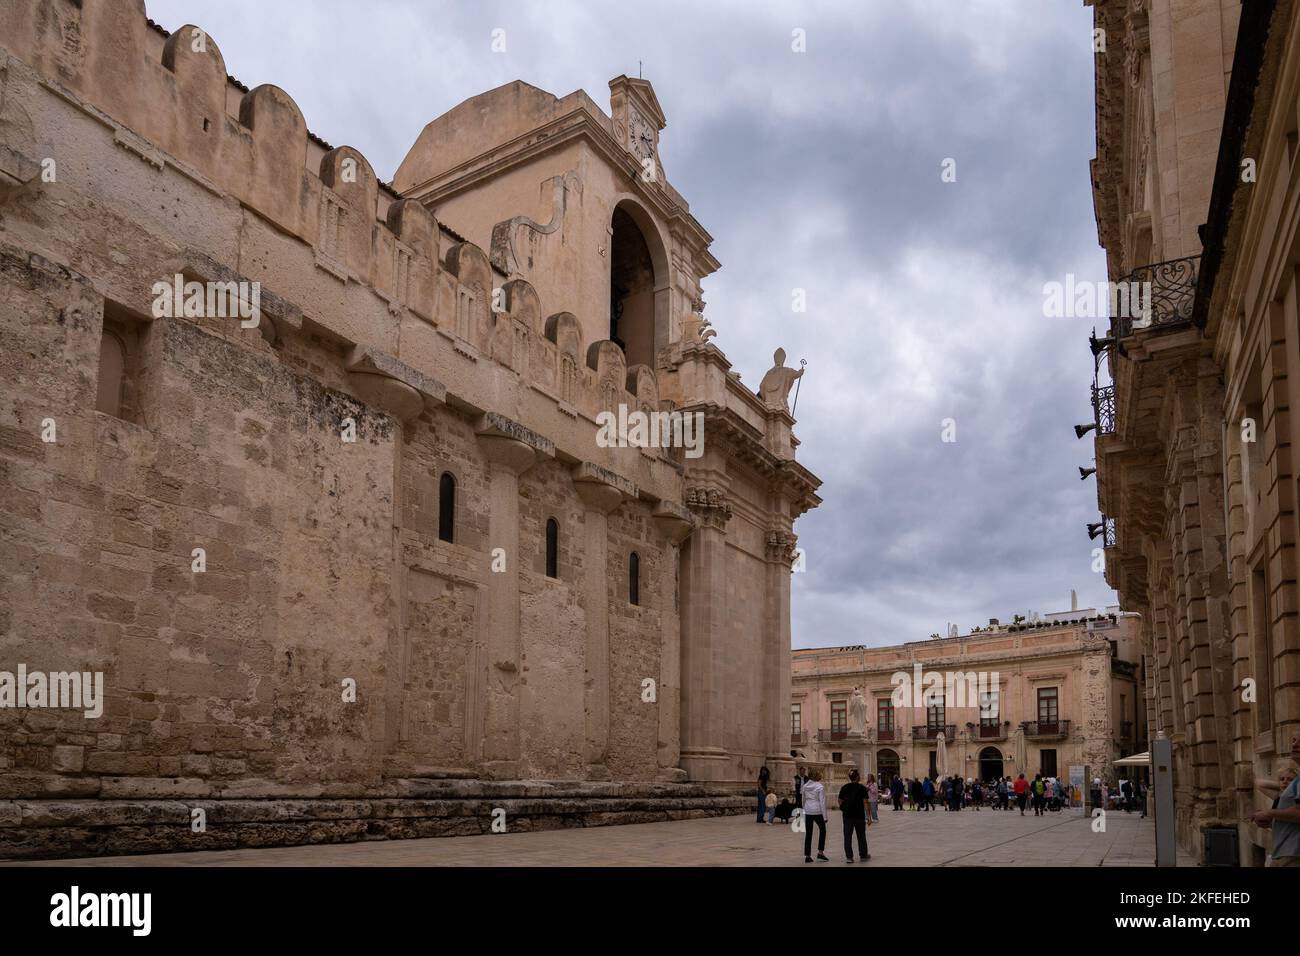 Syracuse cathedral built on top of a Greek temple. Doric columns can be appreciated on the walls. Sicily. Italy. Stock Photo